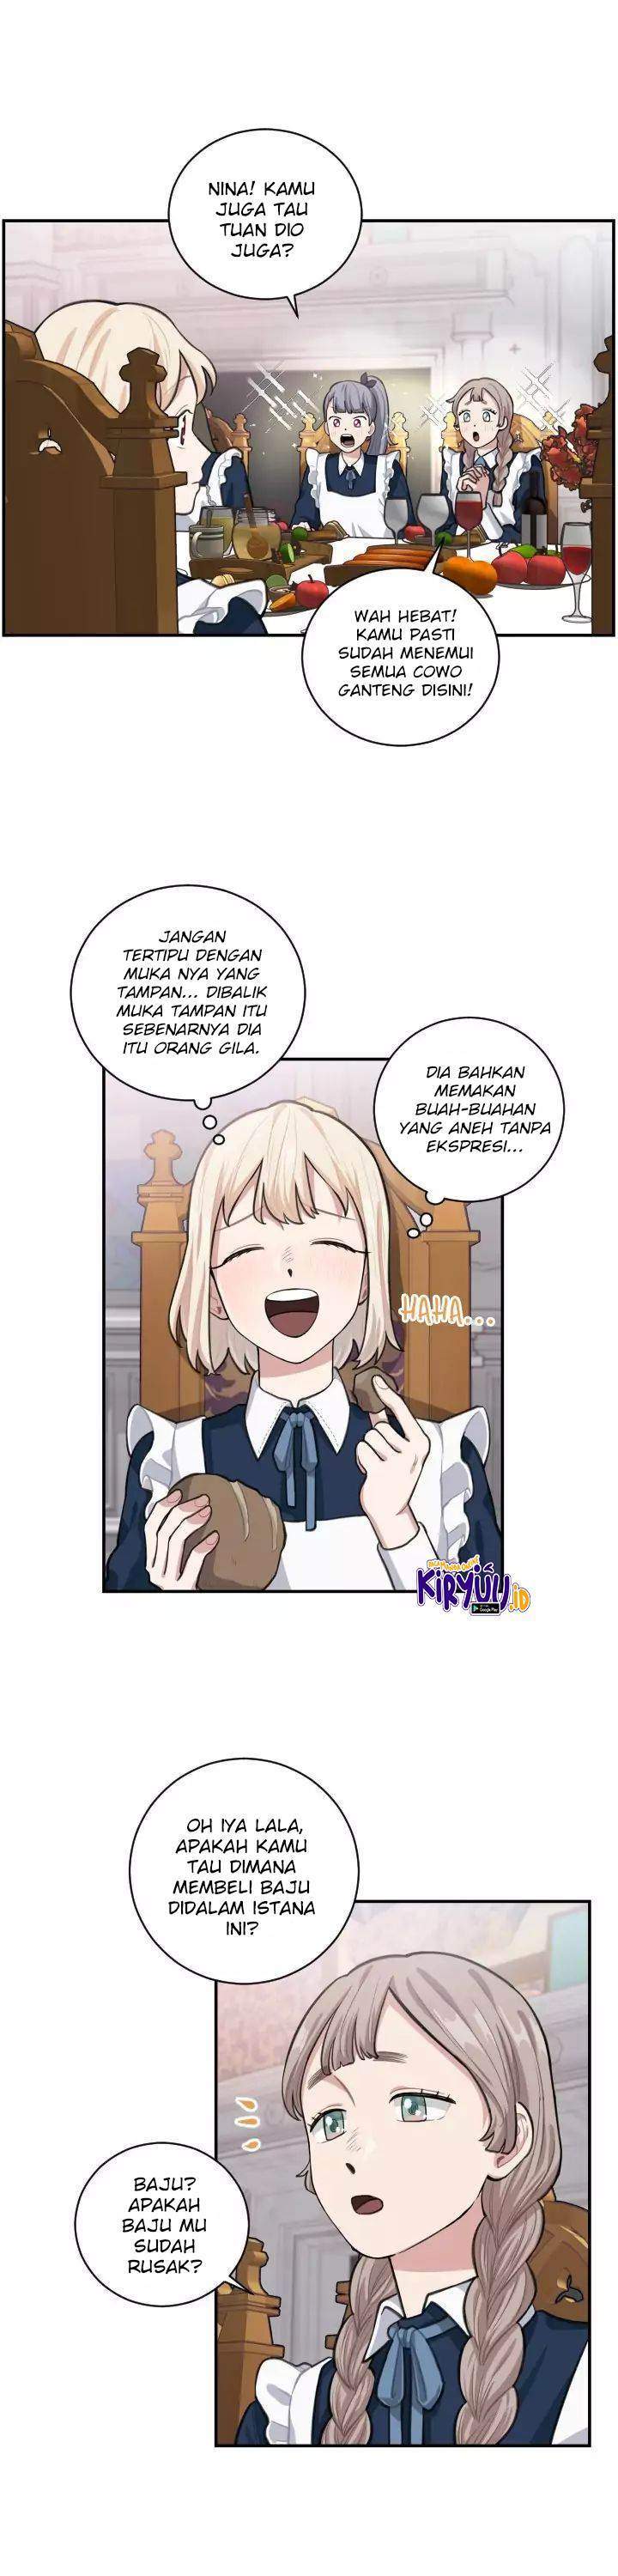 I Became a Maid in a TL Novel Chapter 5 13